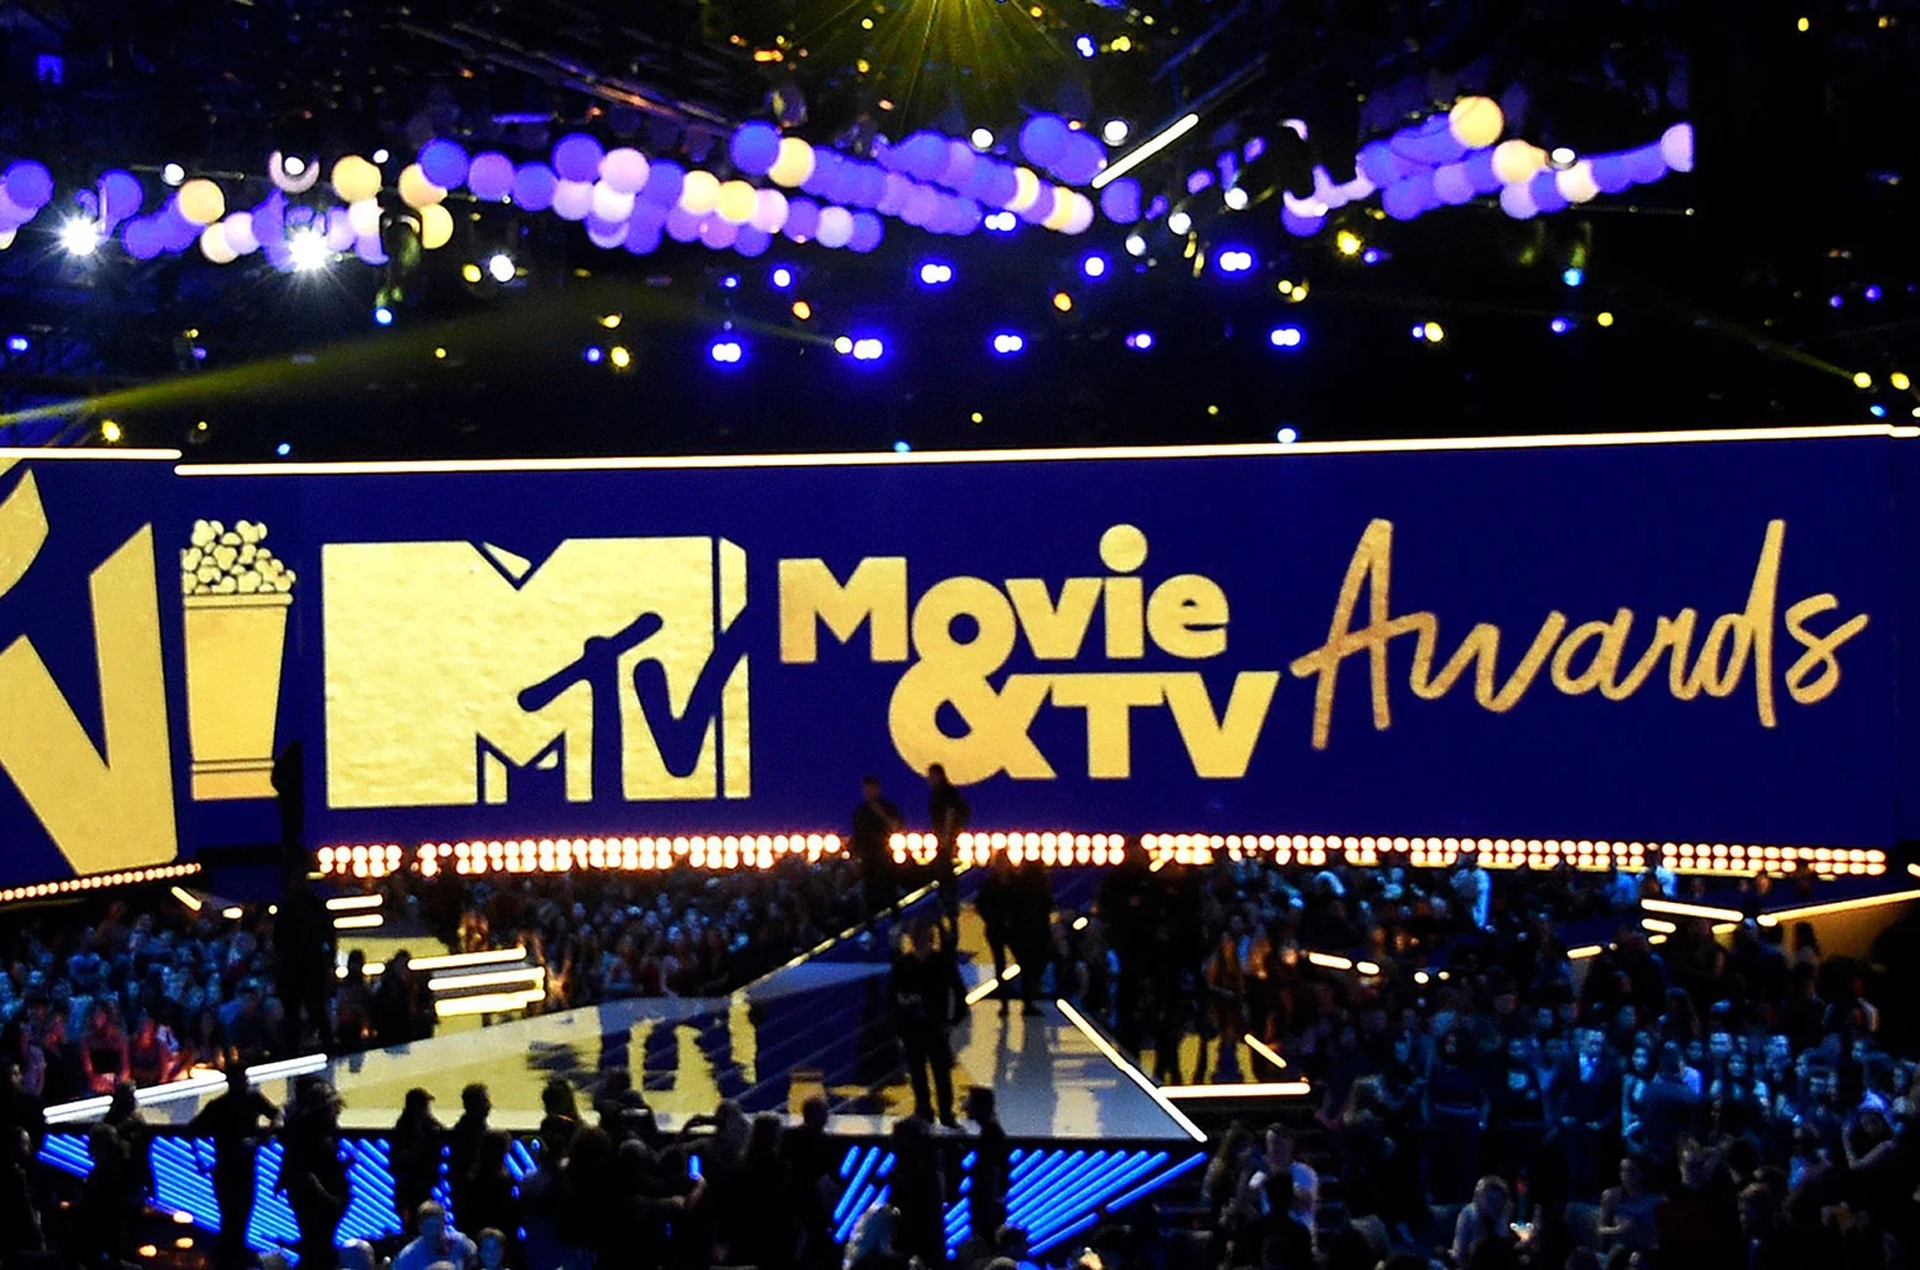 In this article, we are going to go over the MTV Movie Awards 2022 winners, as well as the TV and Unscripted award winners for this year's combined event.